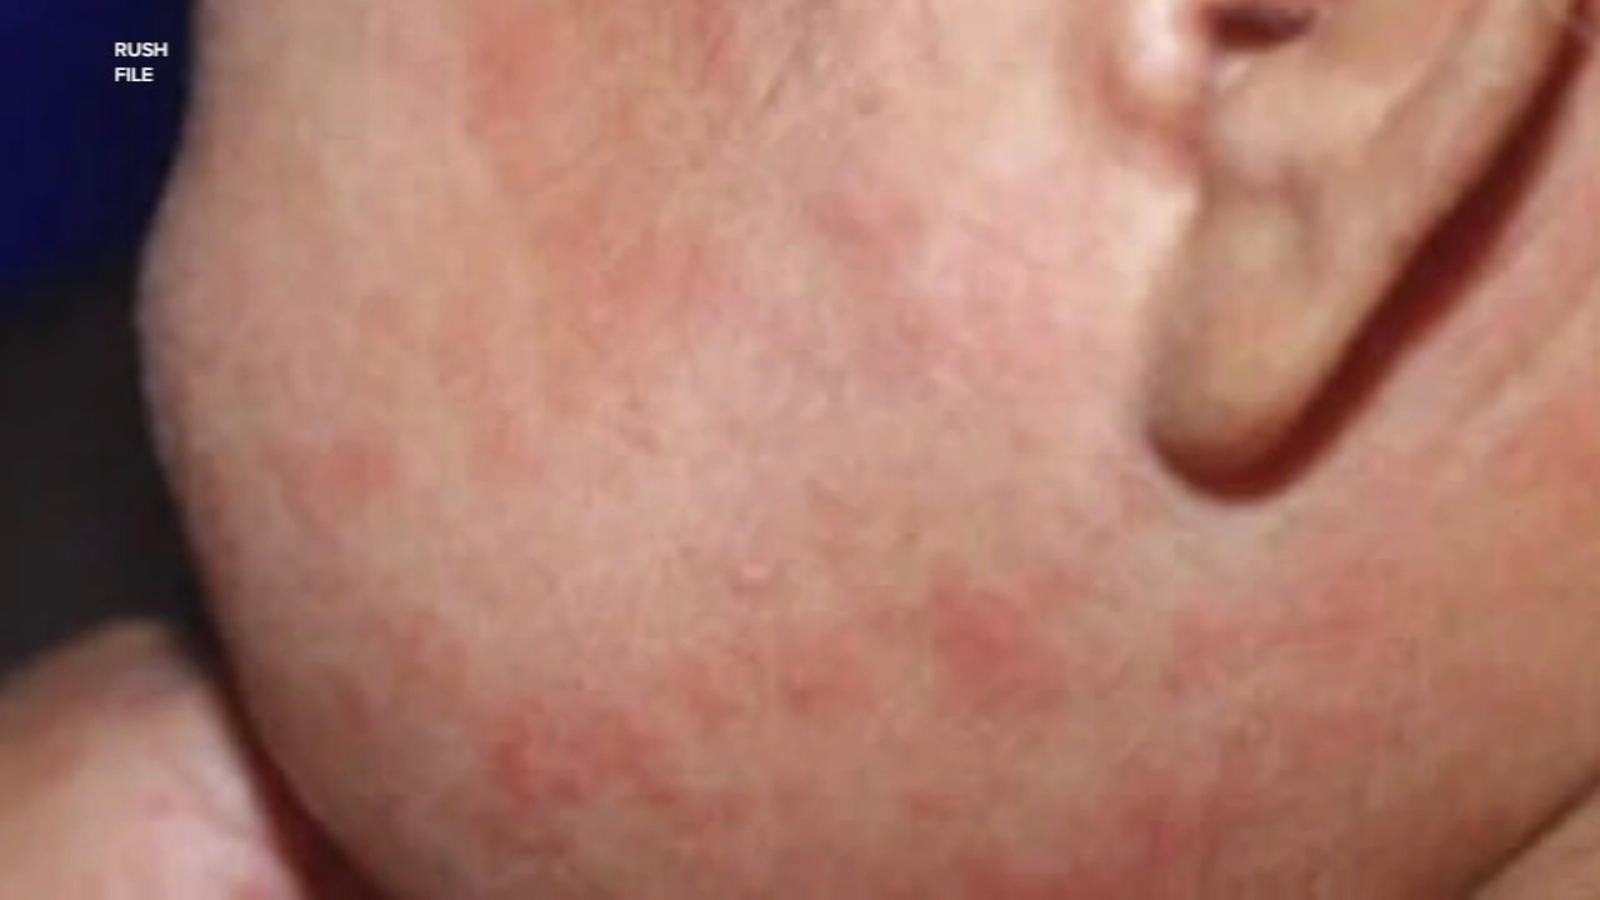 Measles outbreak Chicago: 1st measles case confirmed in suburban Cook County, Illinois as city’s total rises to 52 [Video]